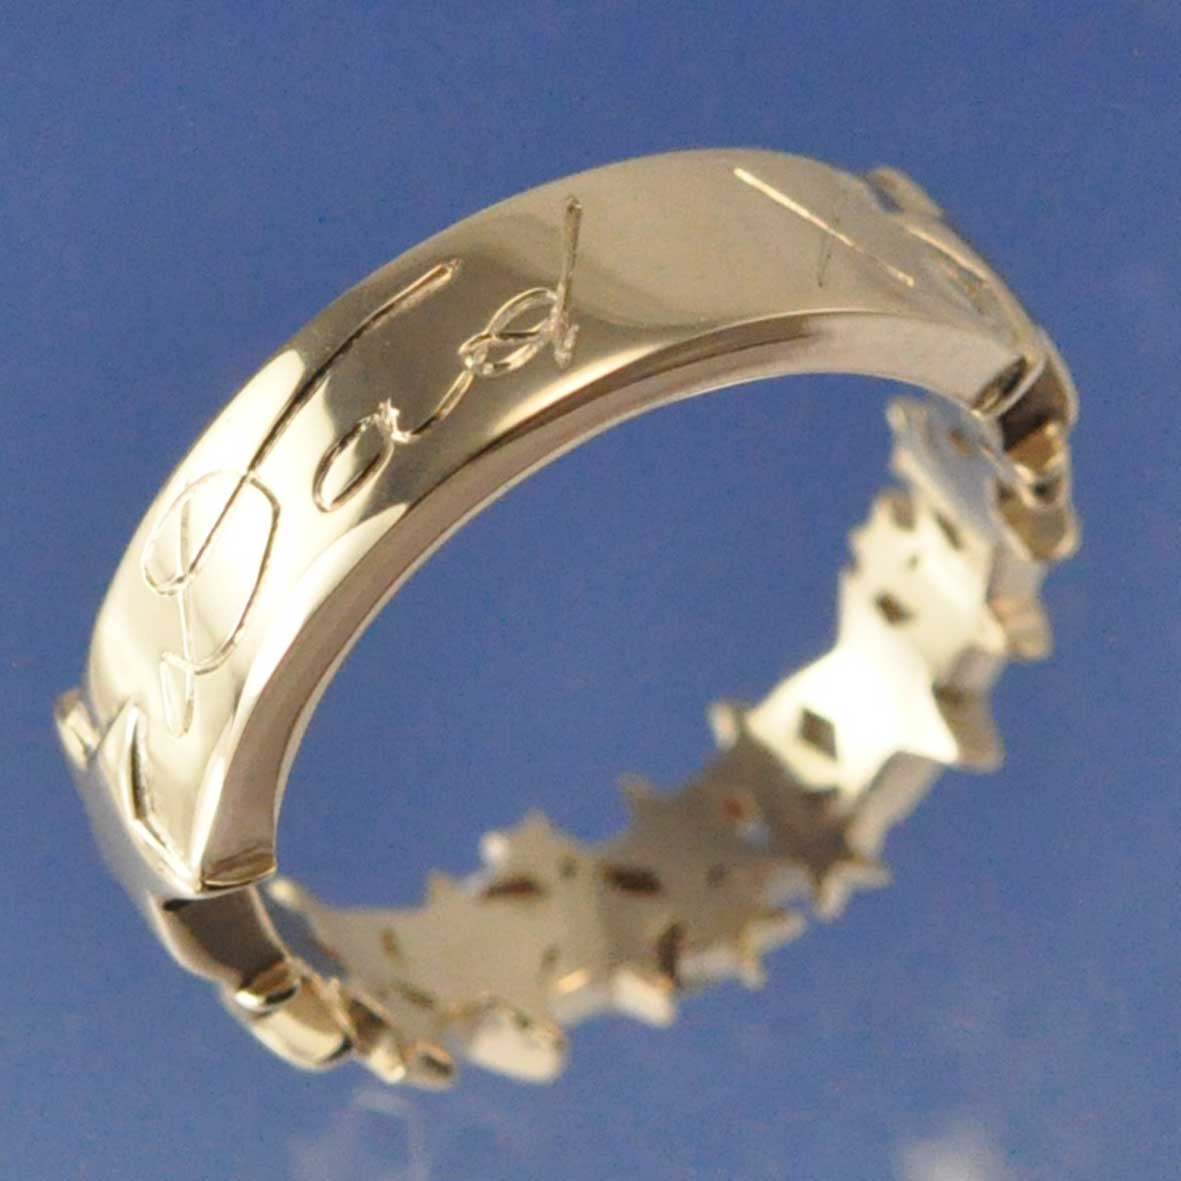 The Star Cremation Ash Hand Writing Ring Ring by Chris Parry Jewellery